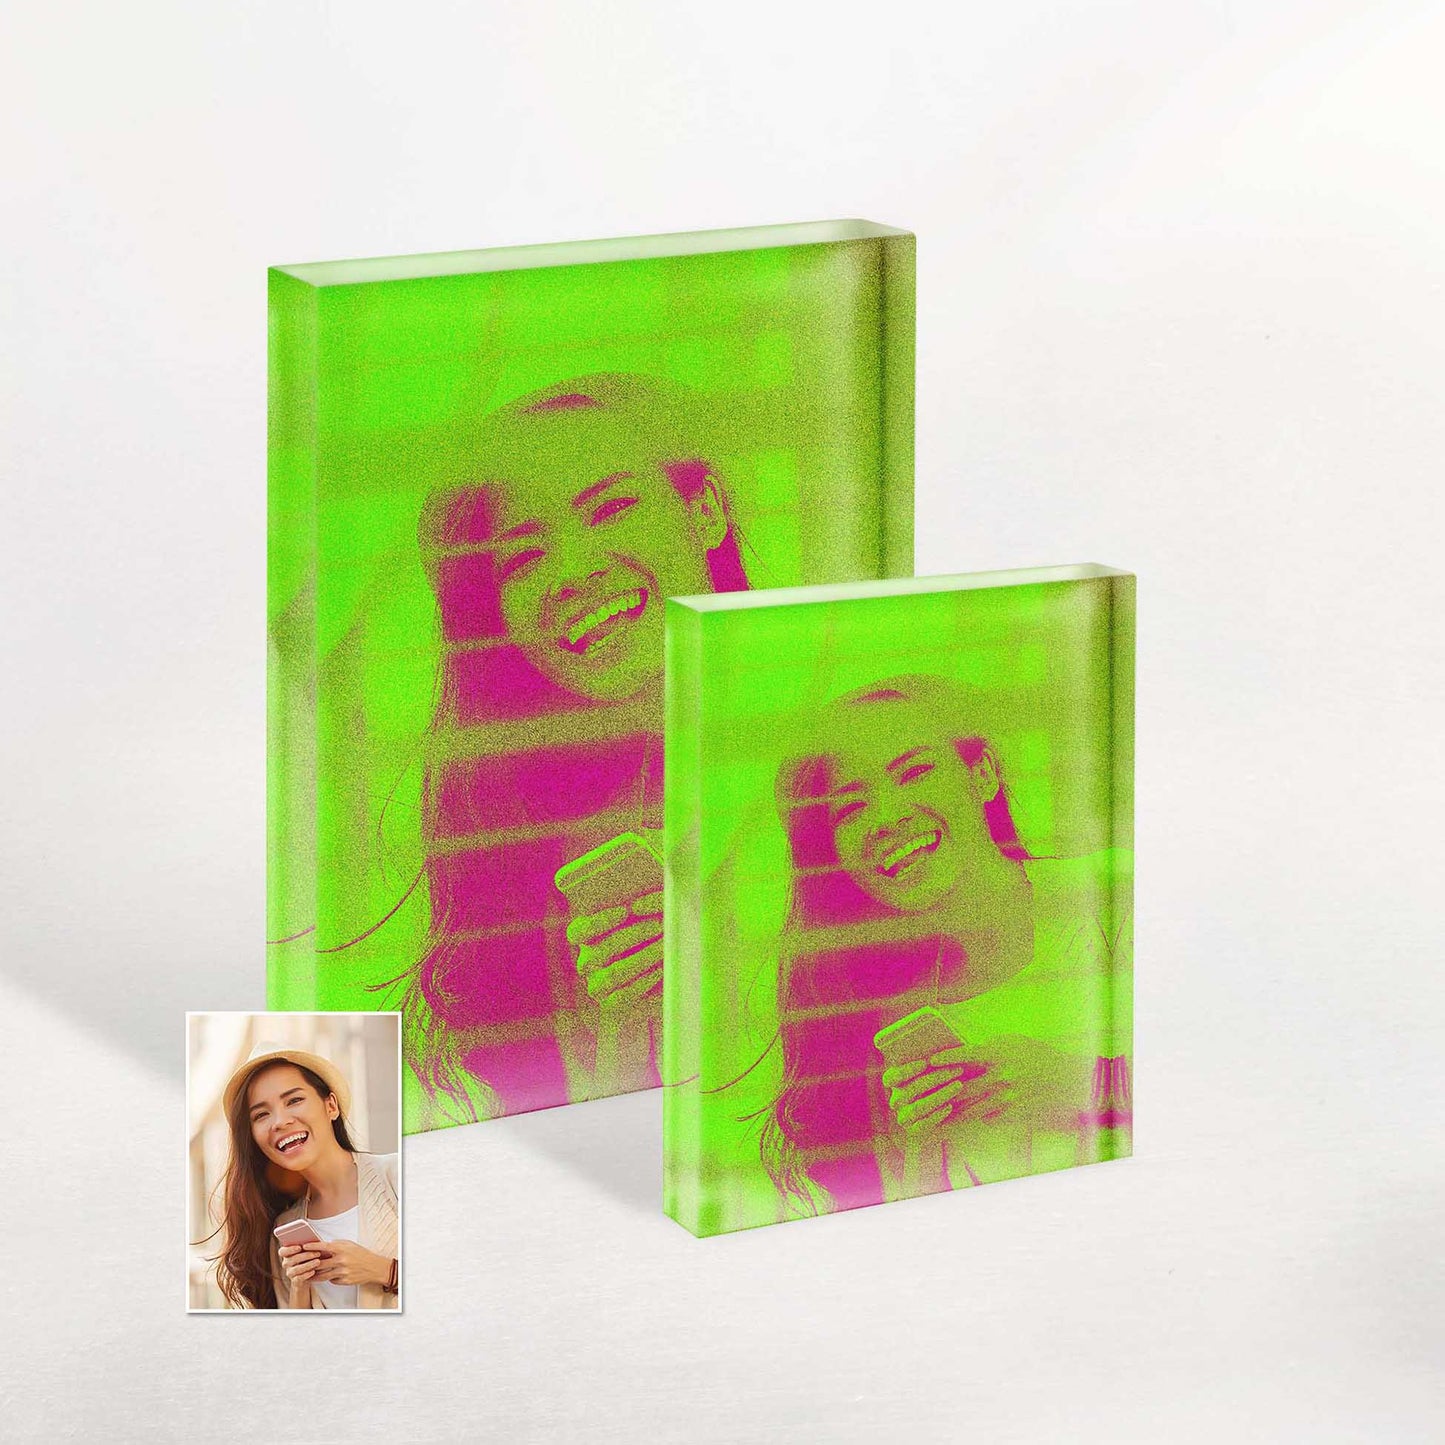 Personalised Neon Green Acrylic Block Photo: A Hip and Unique Gift. Gift something extraordinary with our trendy and cool acrylic block photos. Customised from your photo, it's a fresh and personal present that will impress.